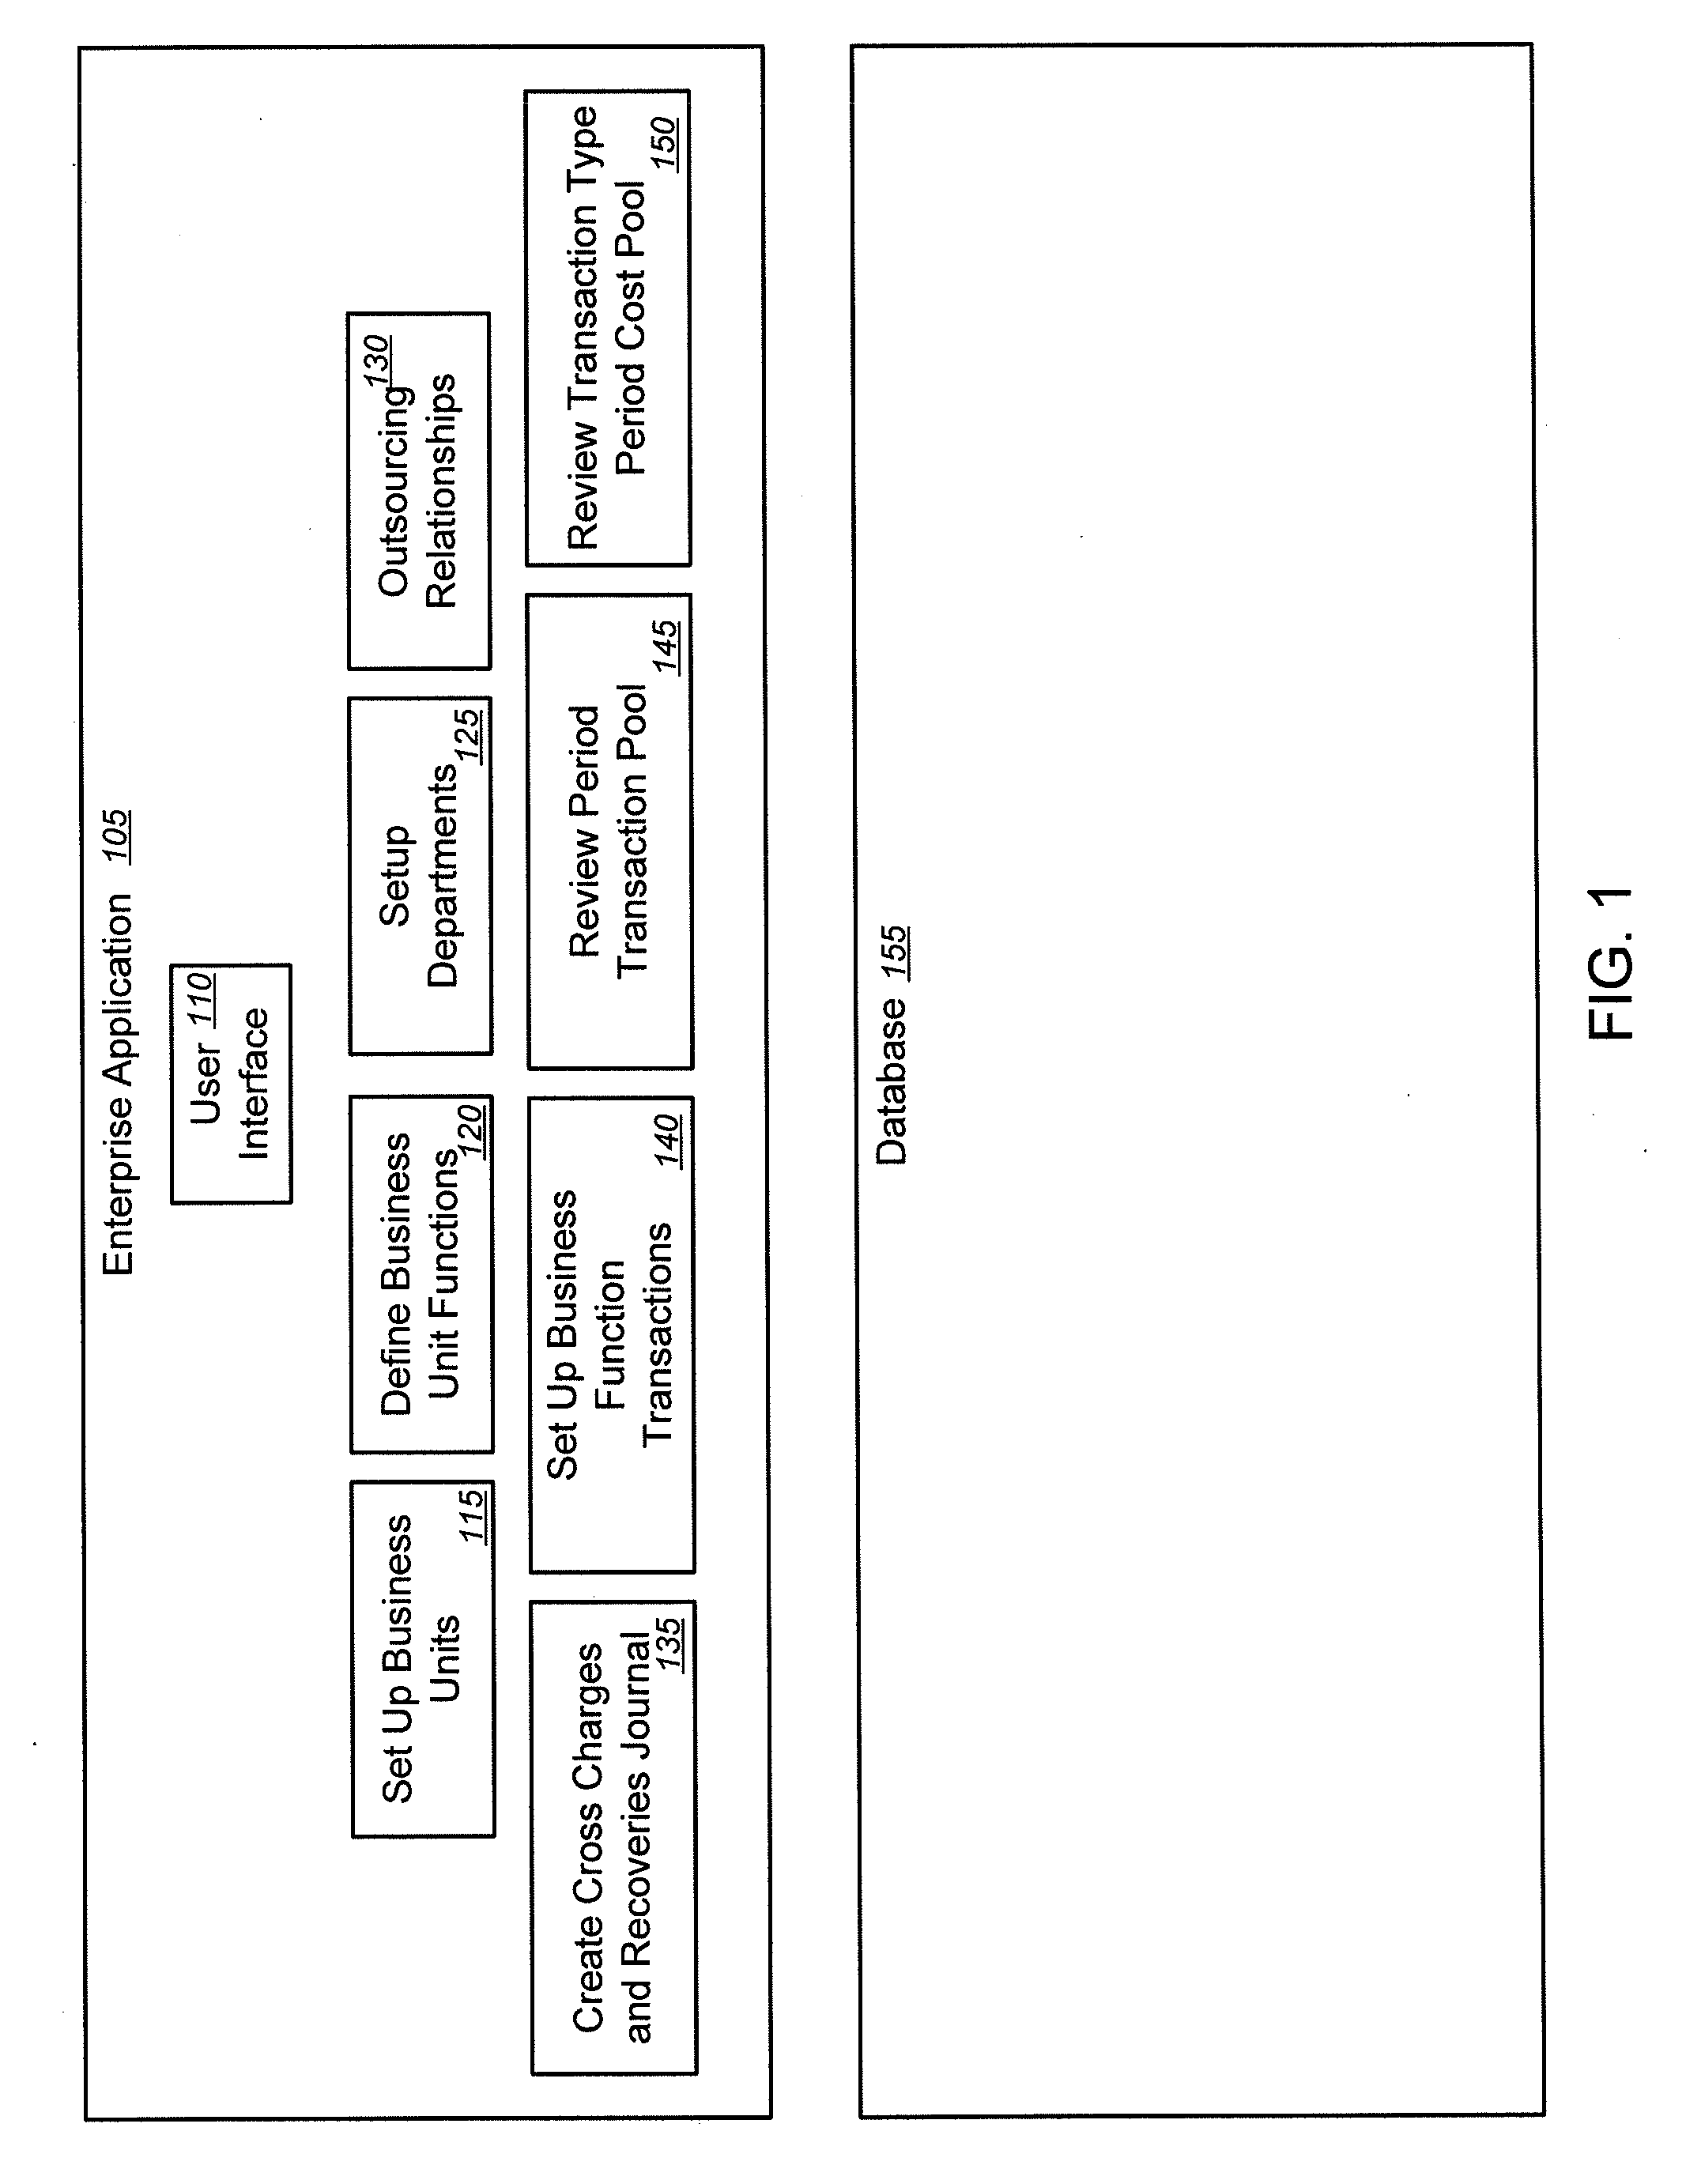 Processes and apparatus to generate cross charge and recoveies for shared service centers